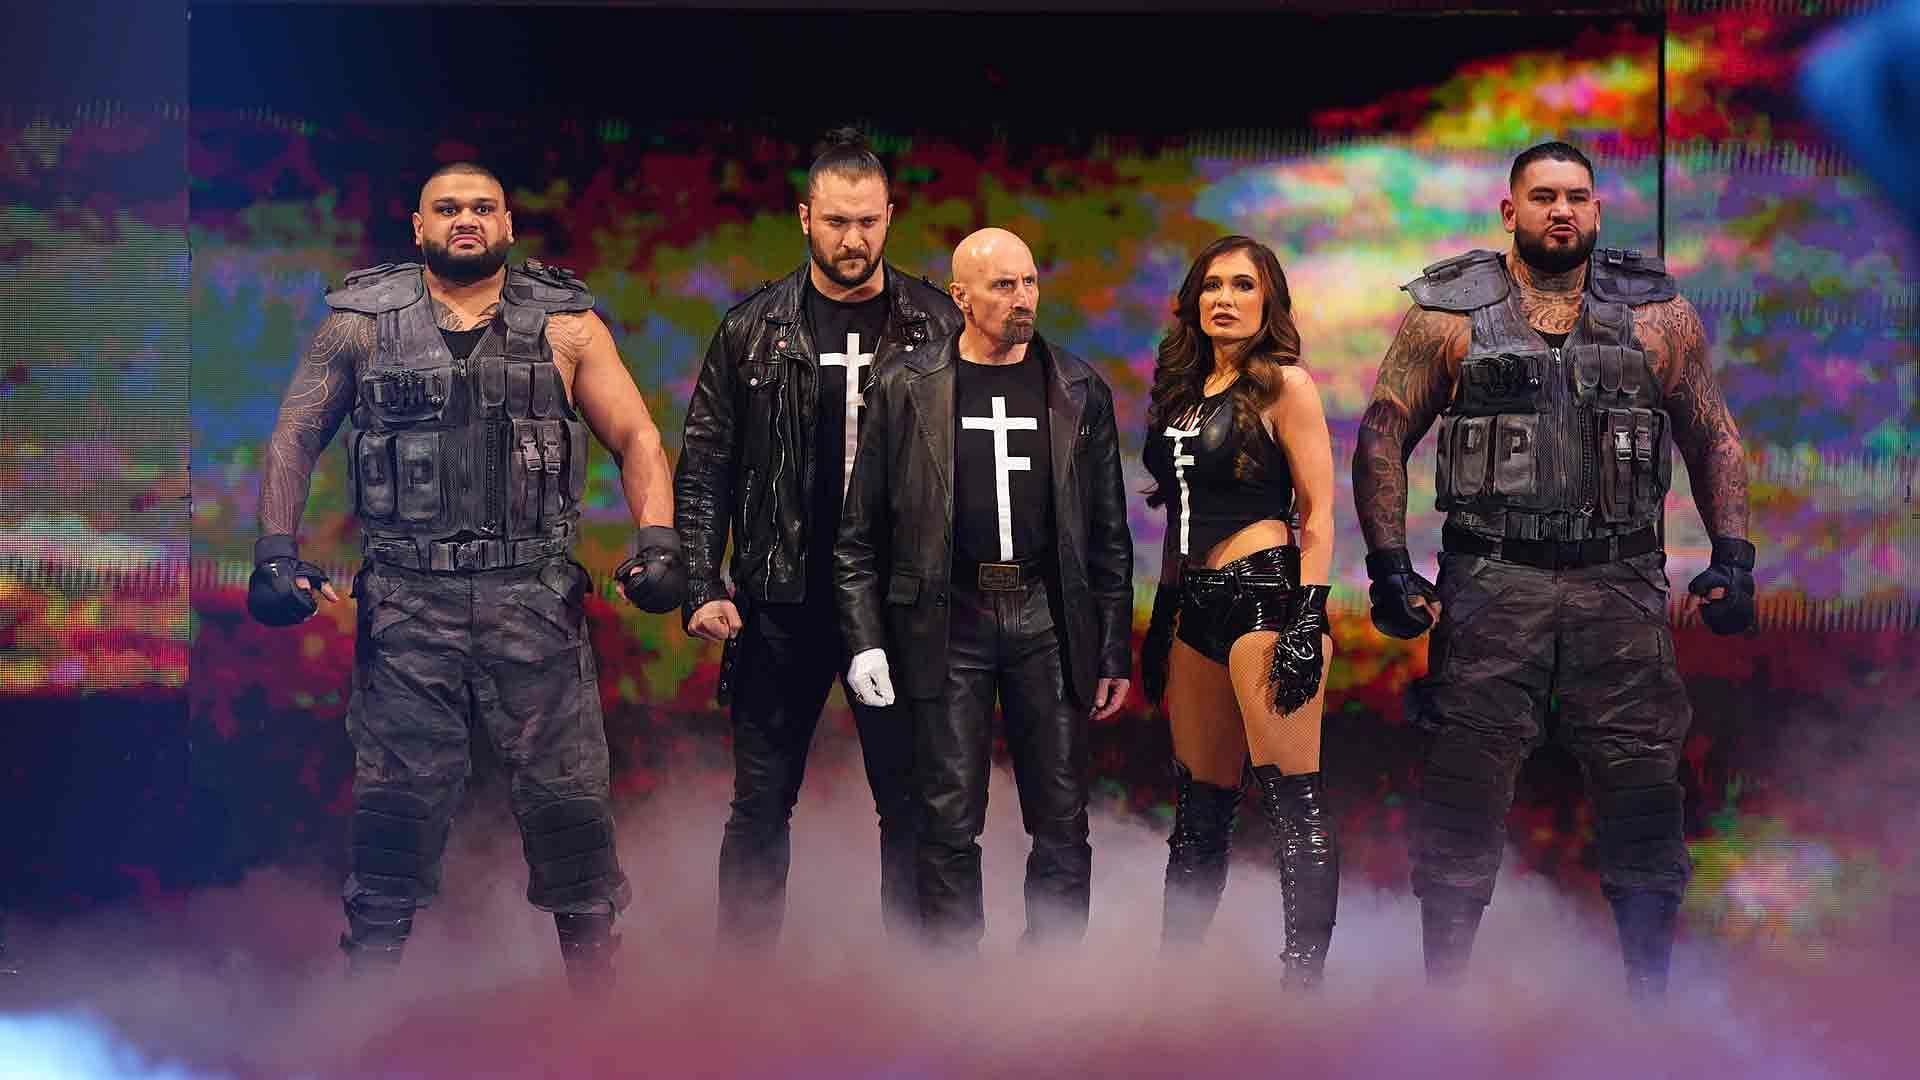 AOP were dominant on SmackDown